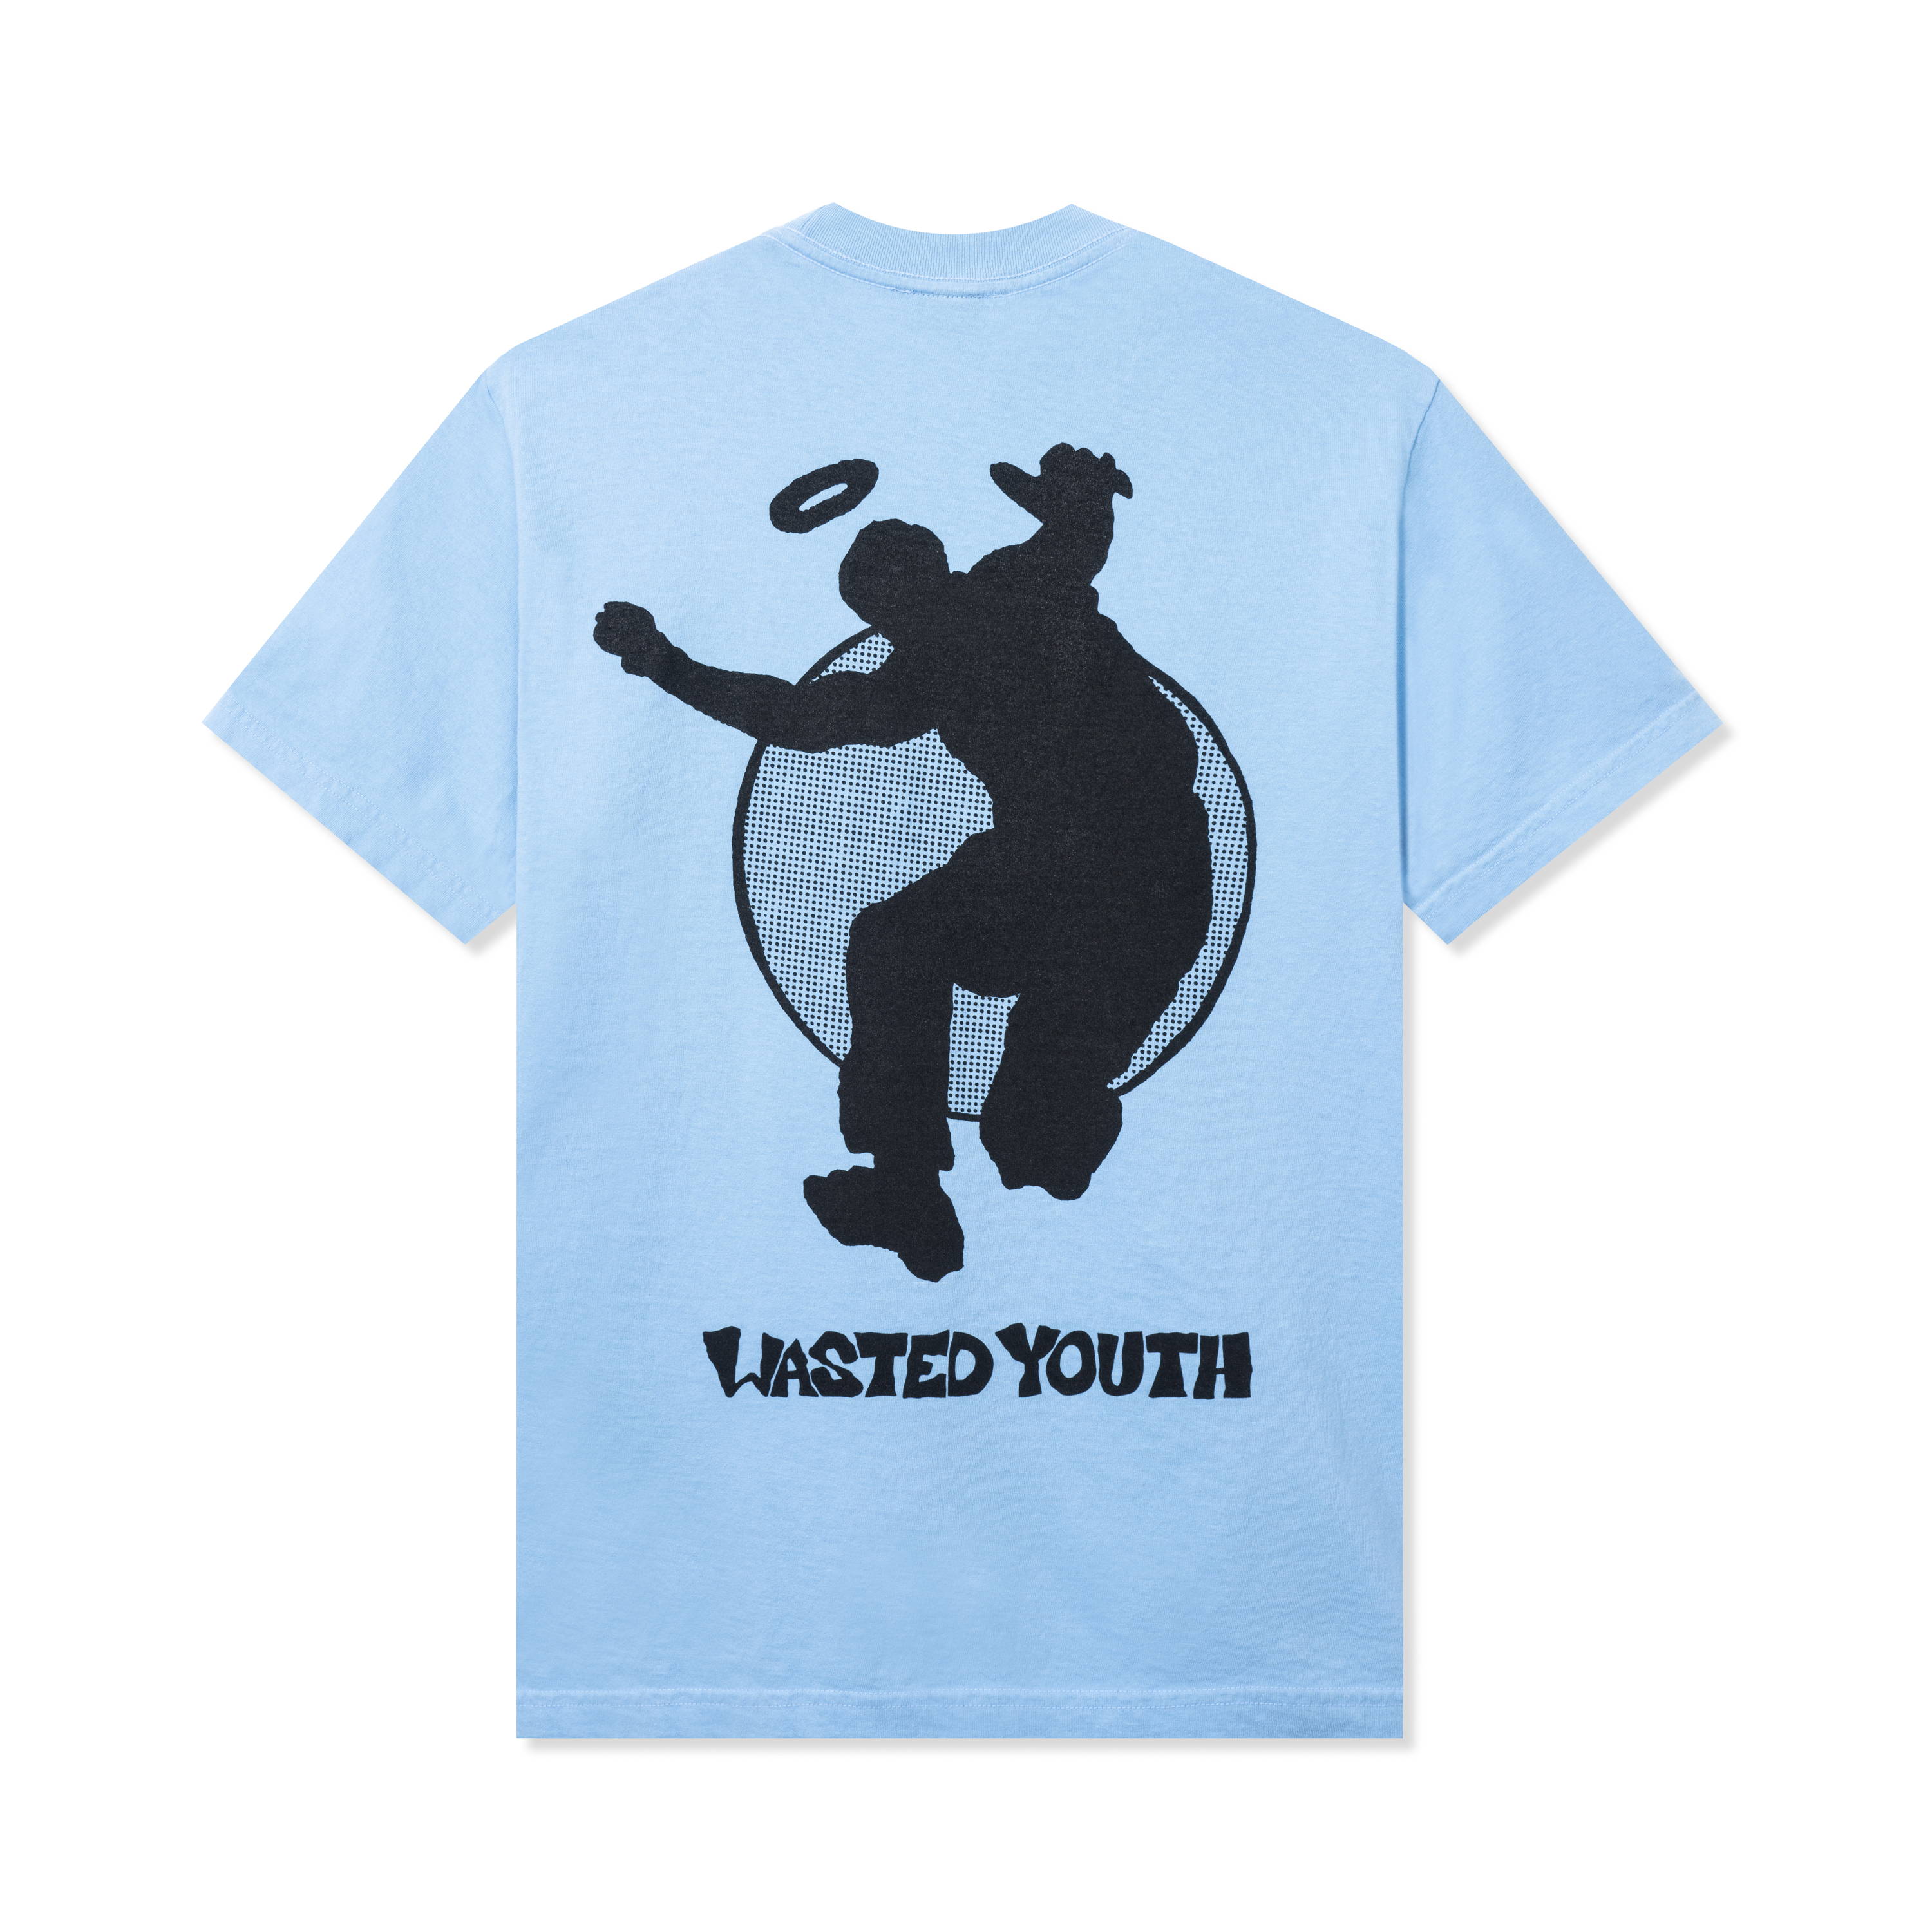 UNION OSAKA X WASTED YOUTH COLLECTION – UNION TOKYO